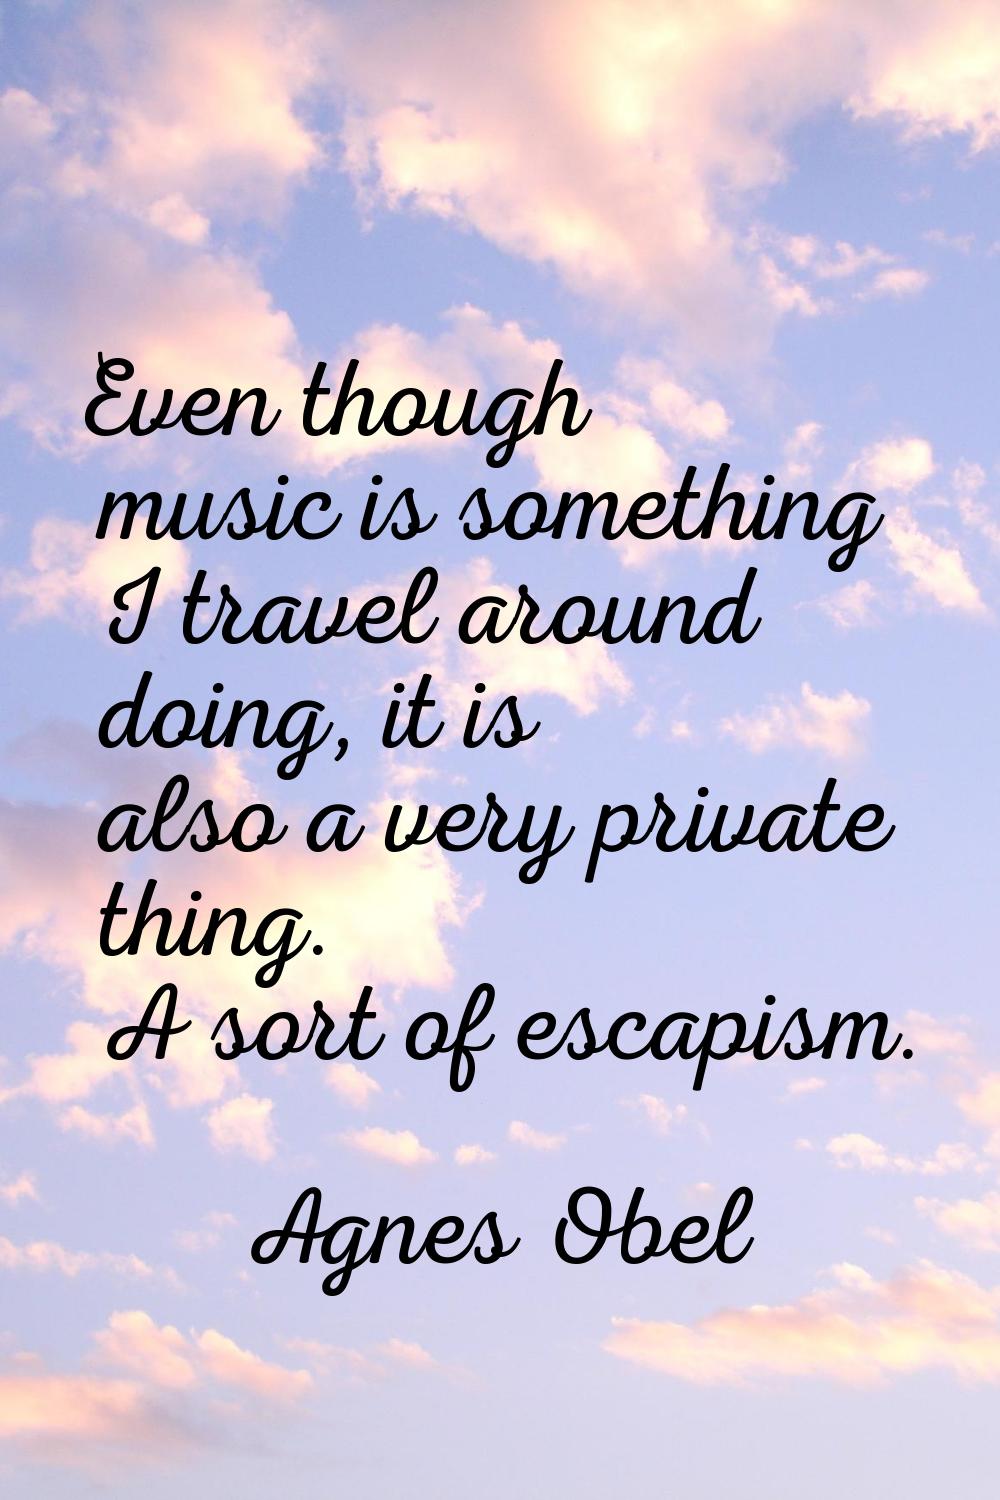 Even though music is something I travel around doing, it is also a very private thing. A sort of es